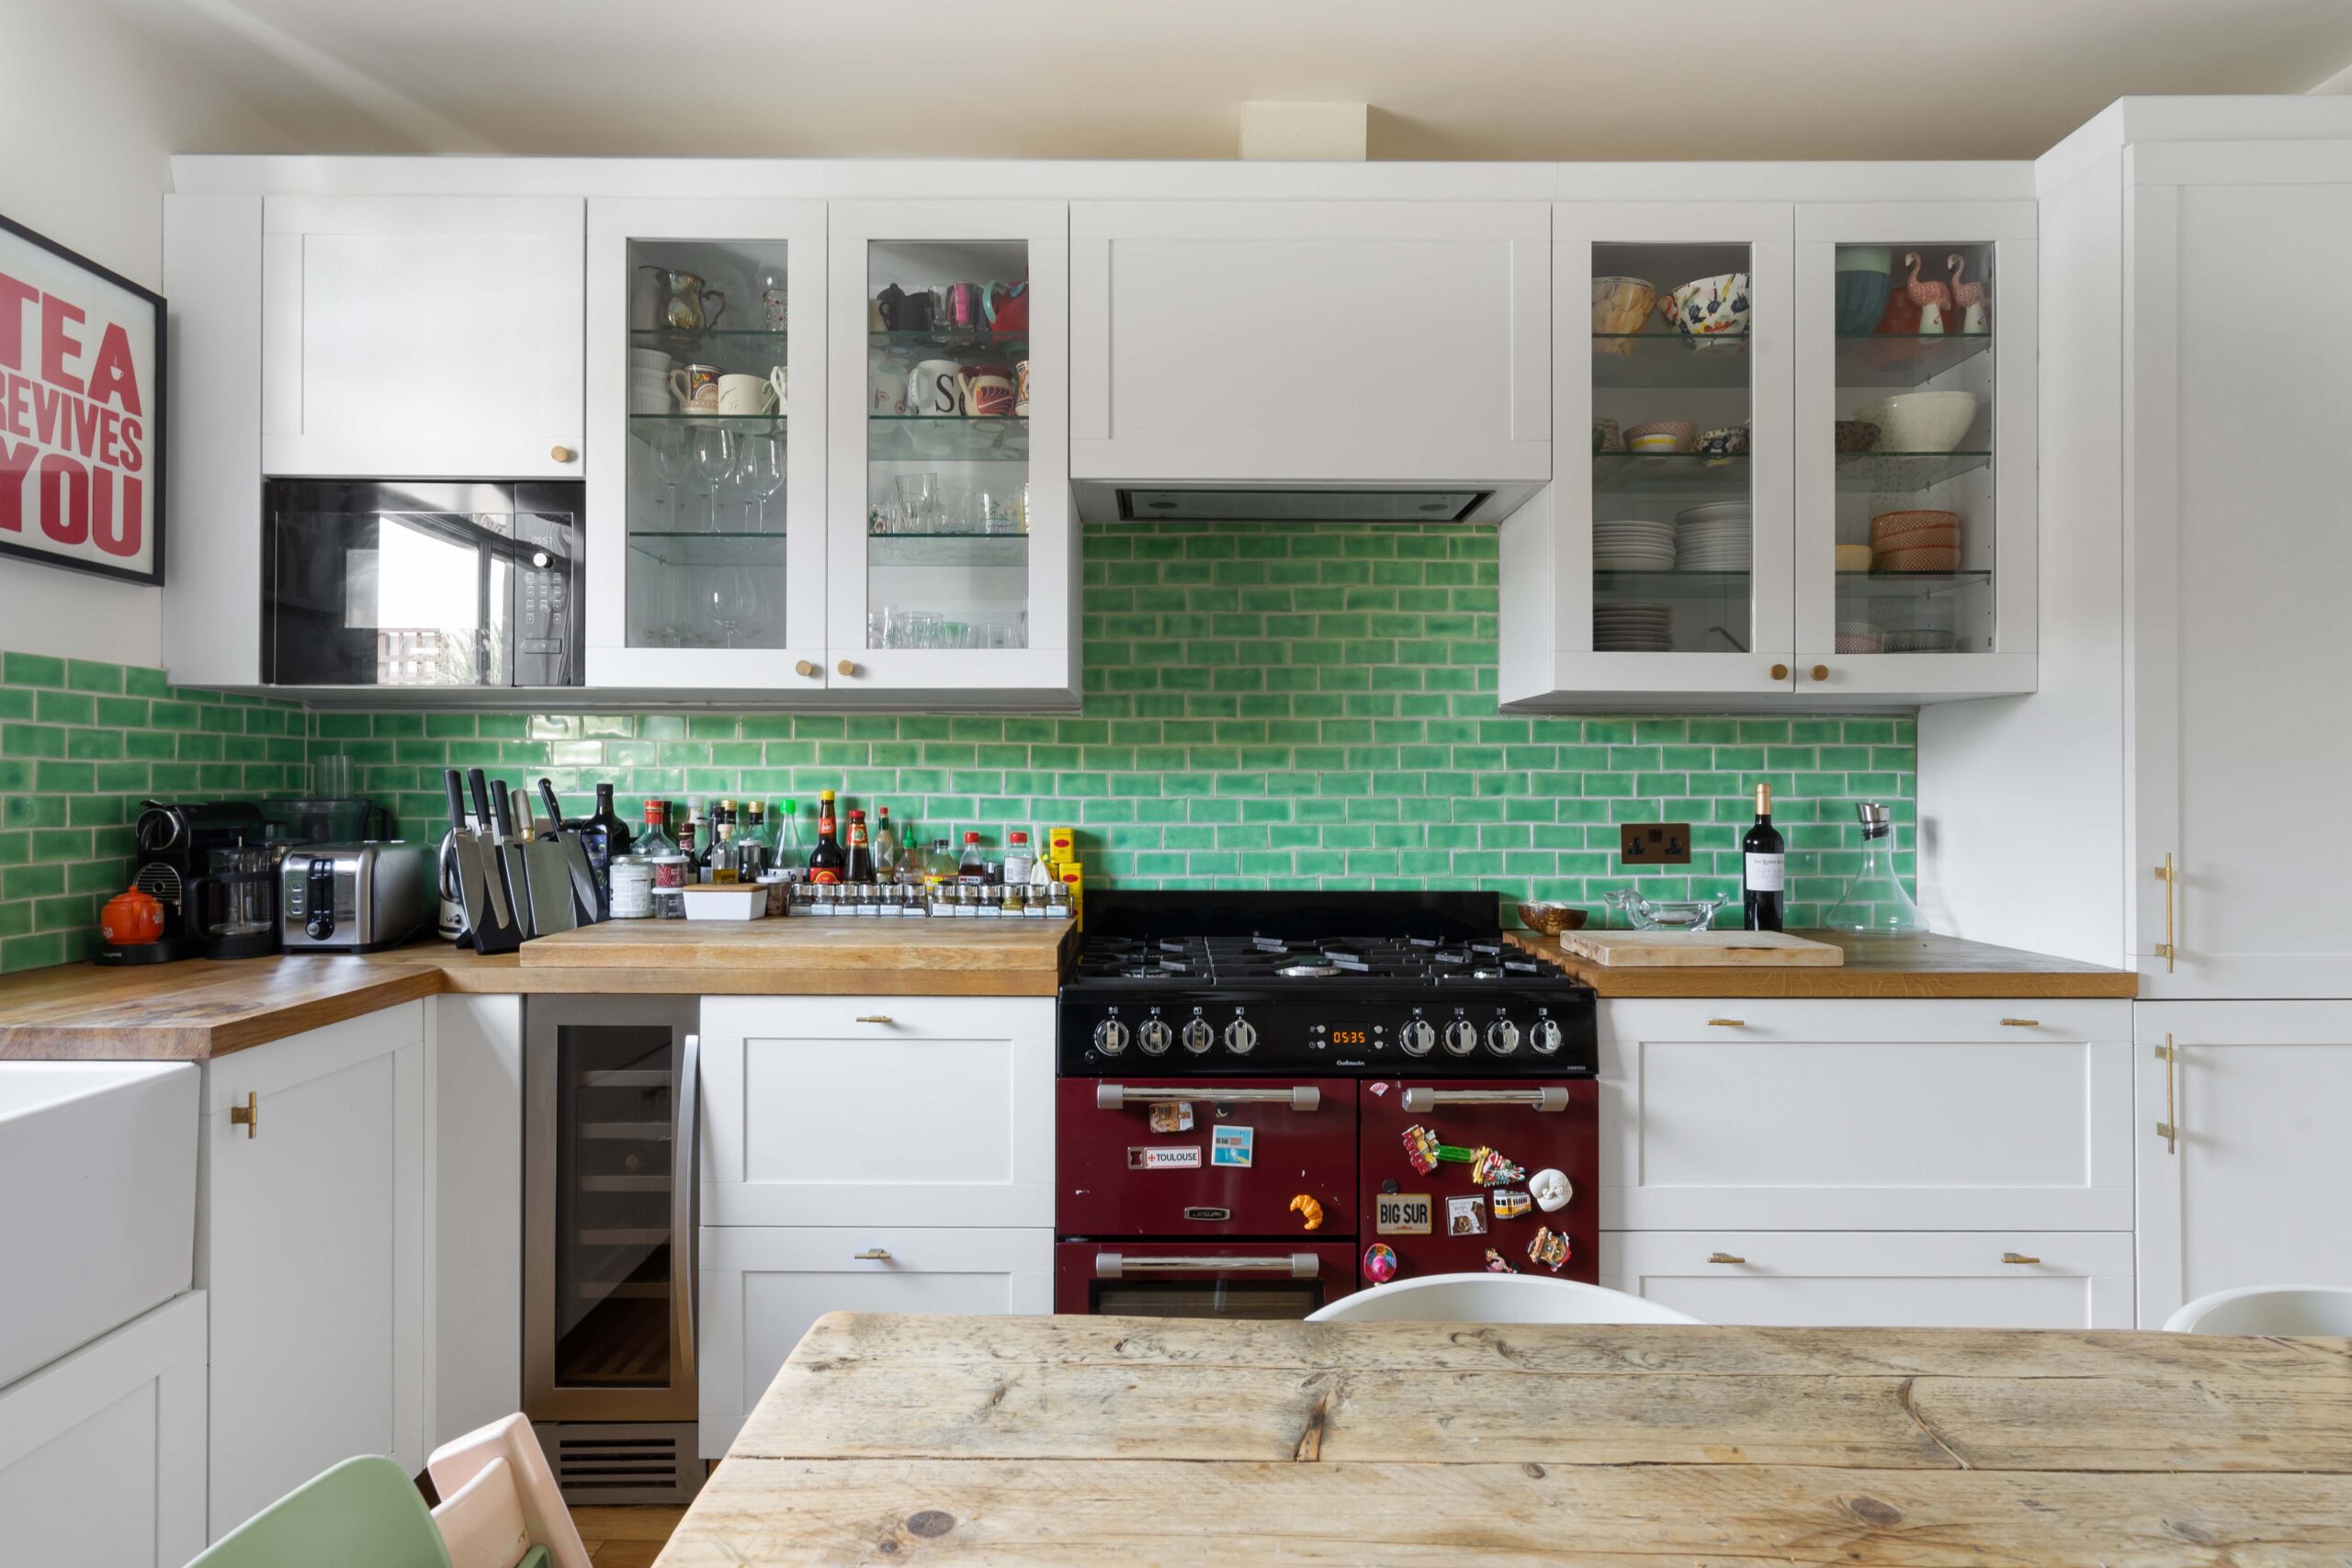 Kensington Park Road kitchen with bright green metro tiles and white cabinets